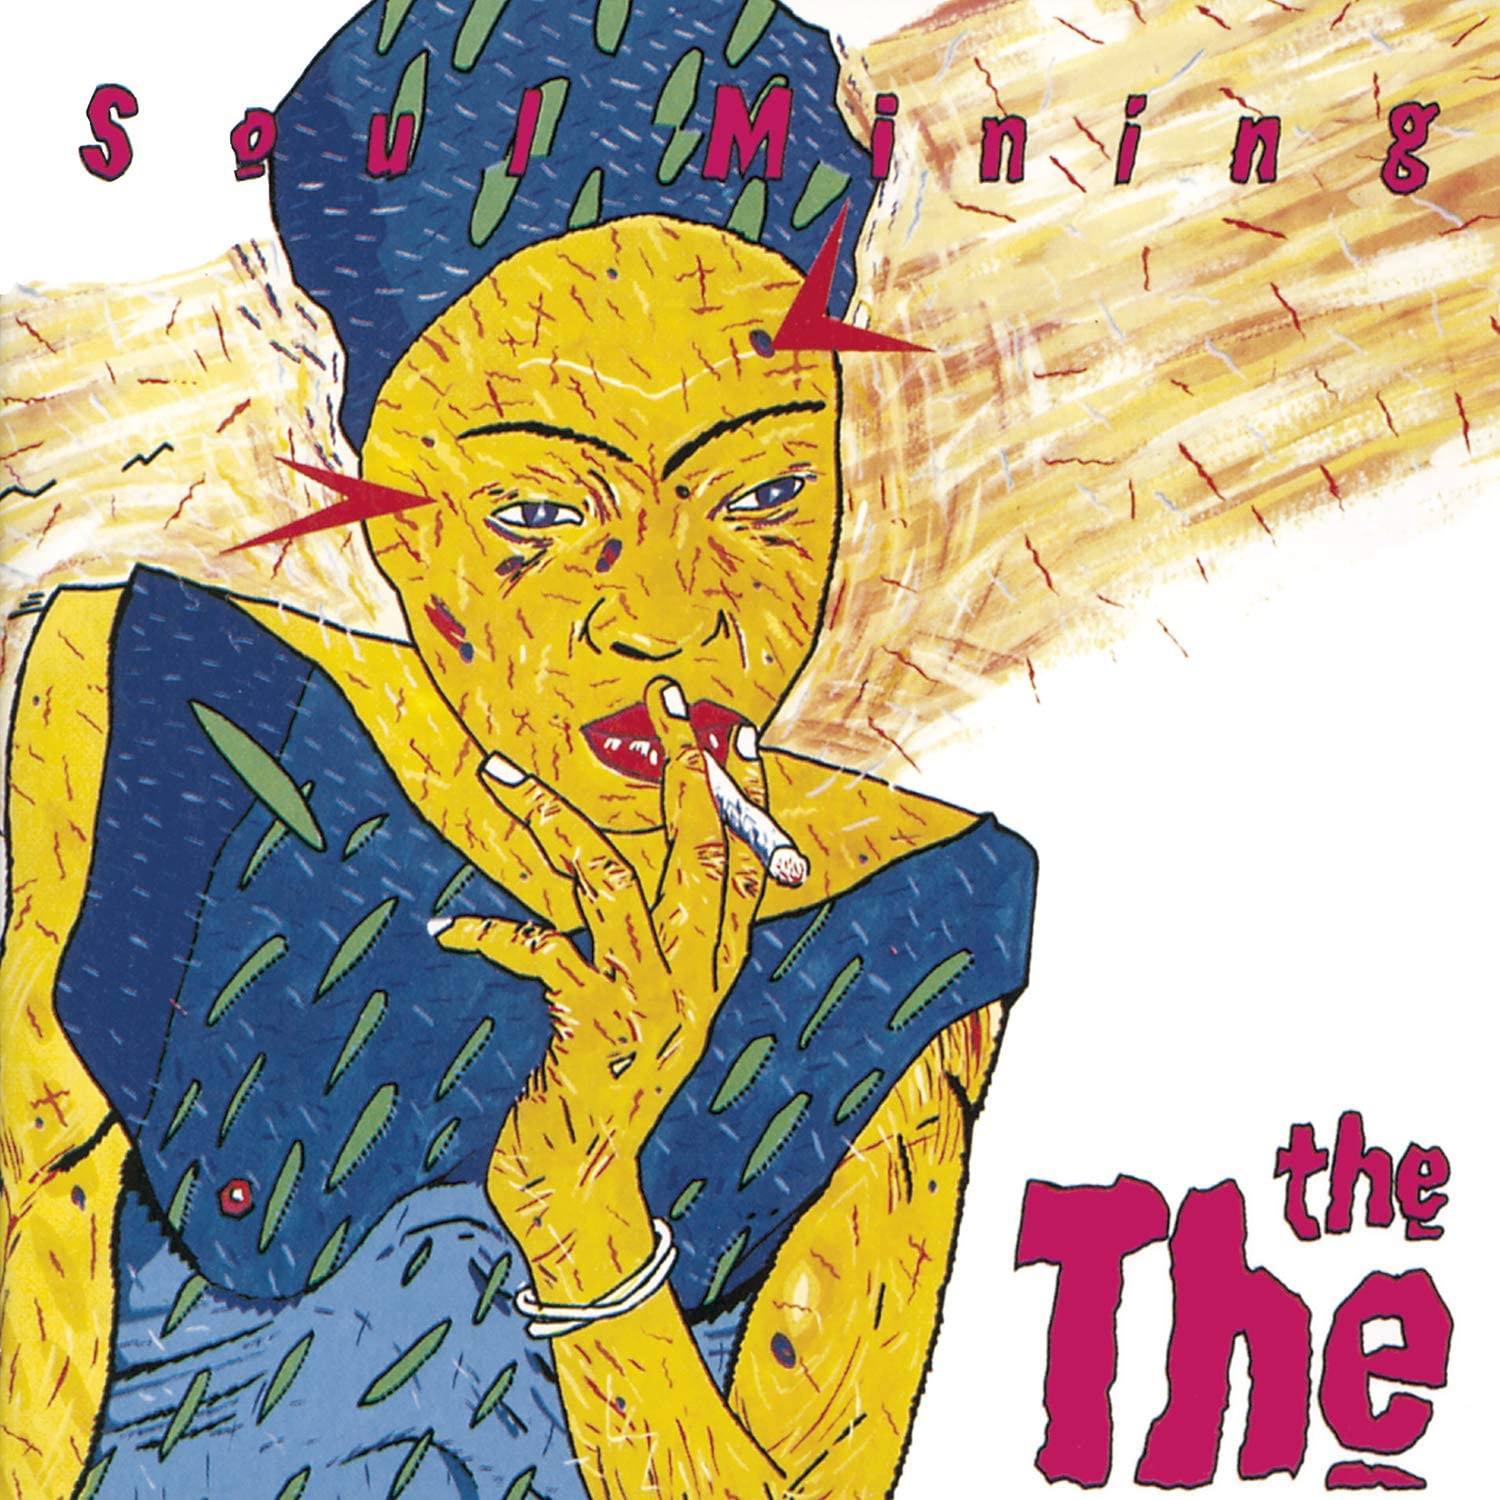 News – The The – Soul Mining – LP and Andy Dog Collection